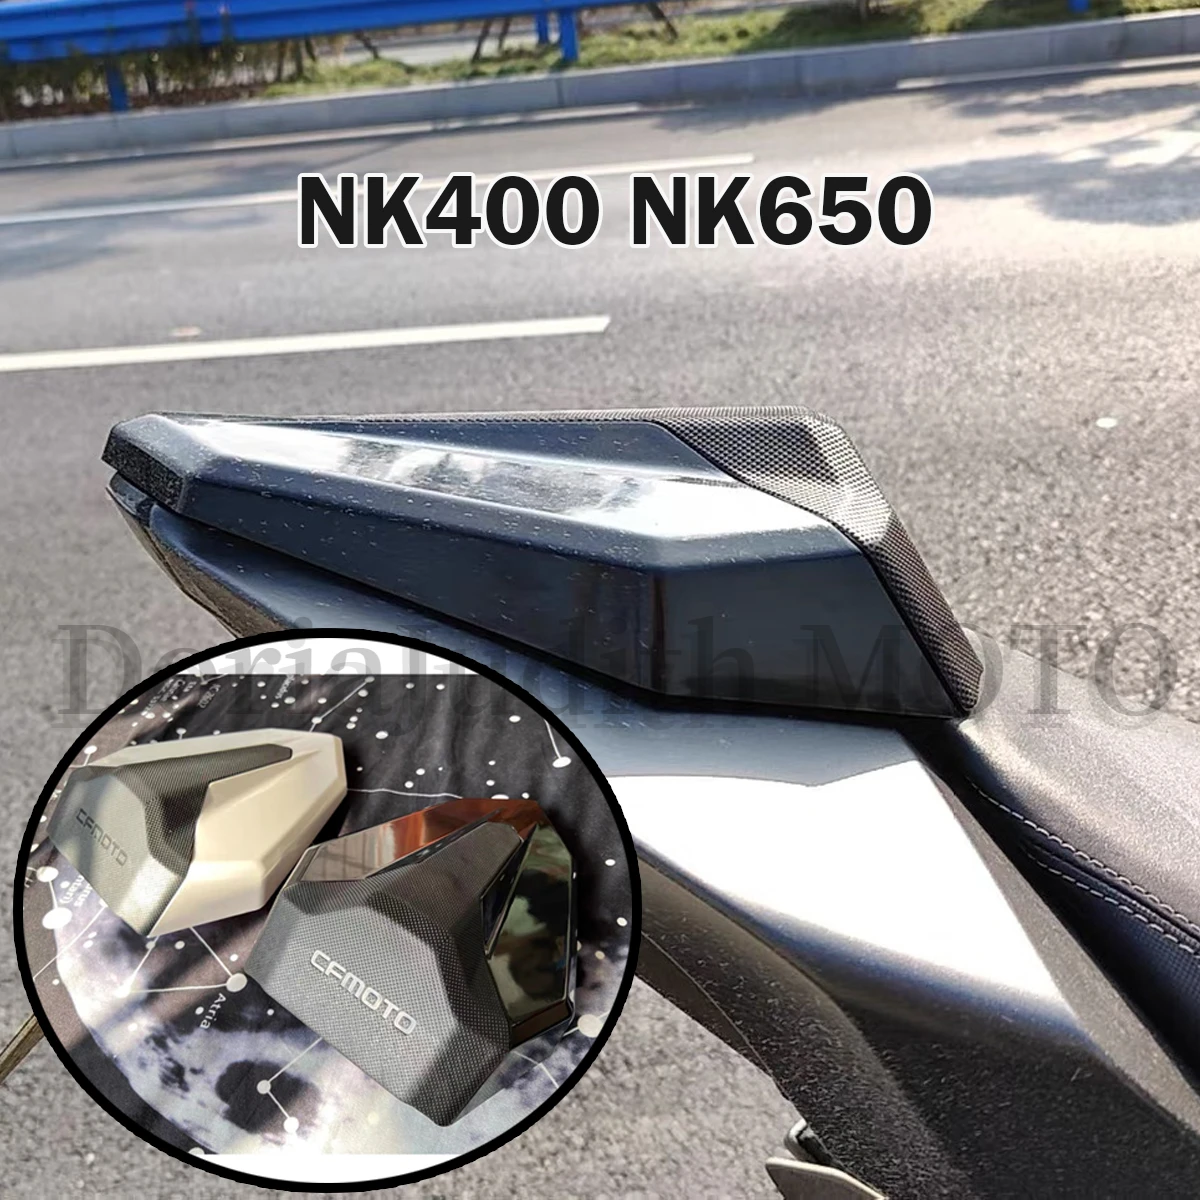 Dification rear seat new rear hump seat cover refit original new model for cfmoto 400nk thumb200